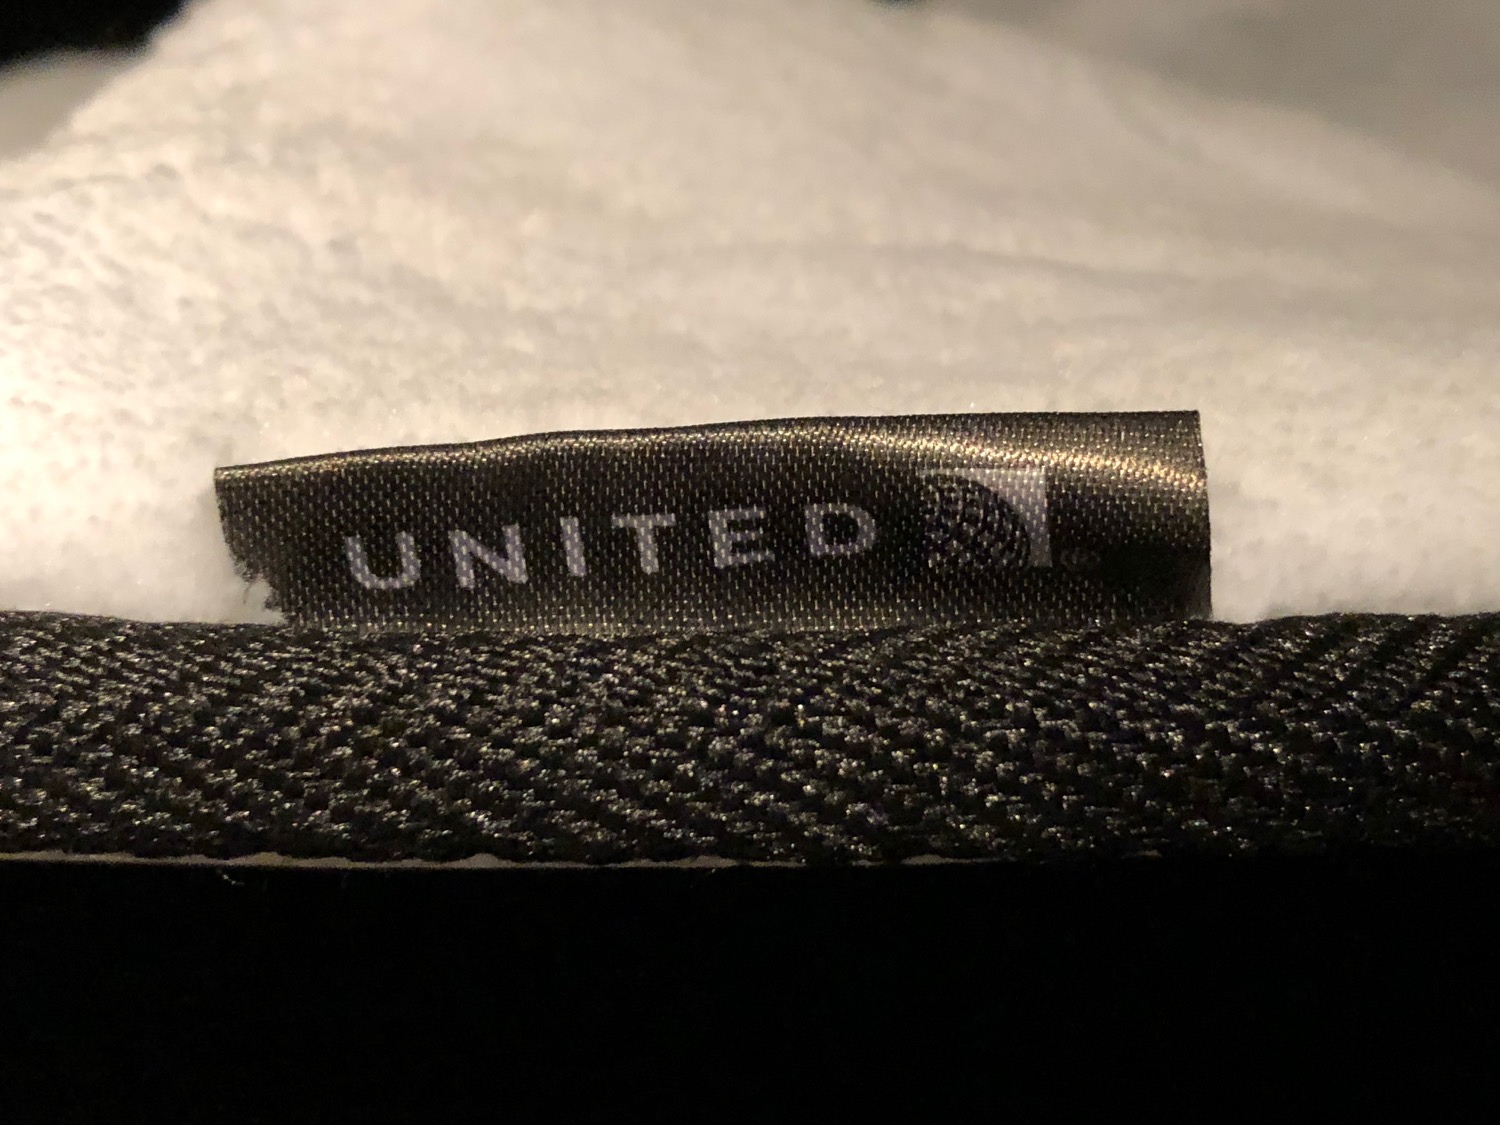 a black label on a white fabric